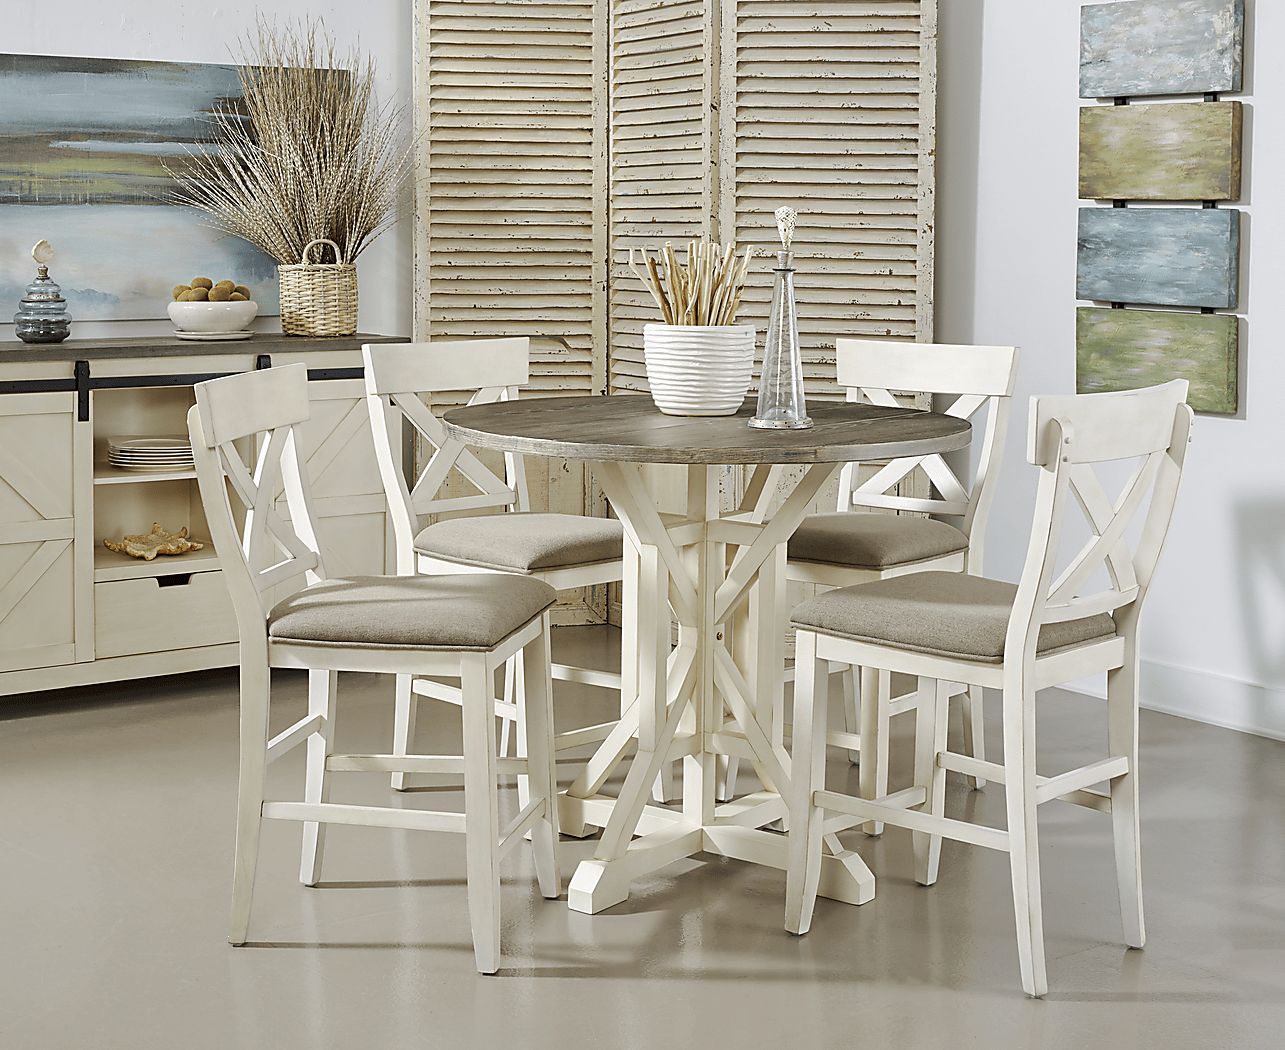 Airymeadows Cream Counter Height Dining Table